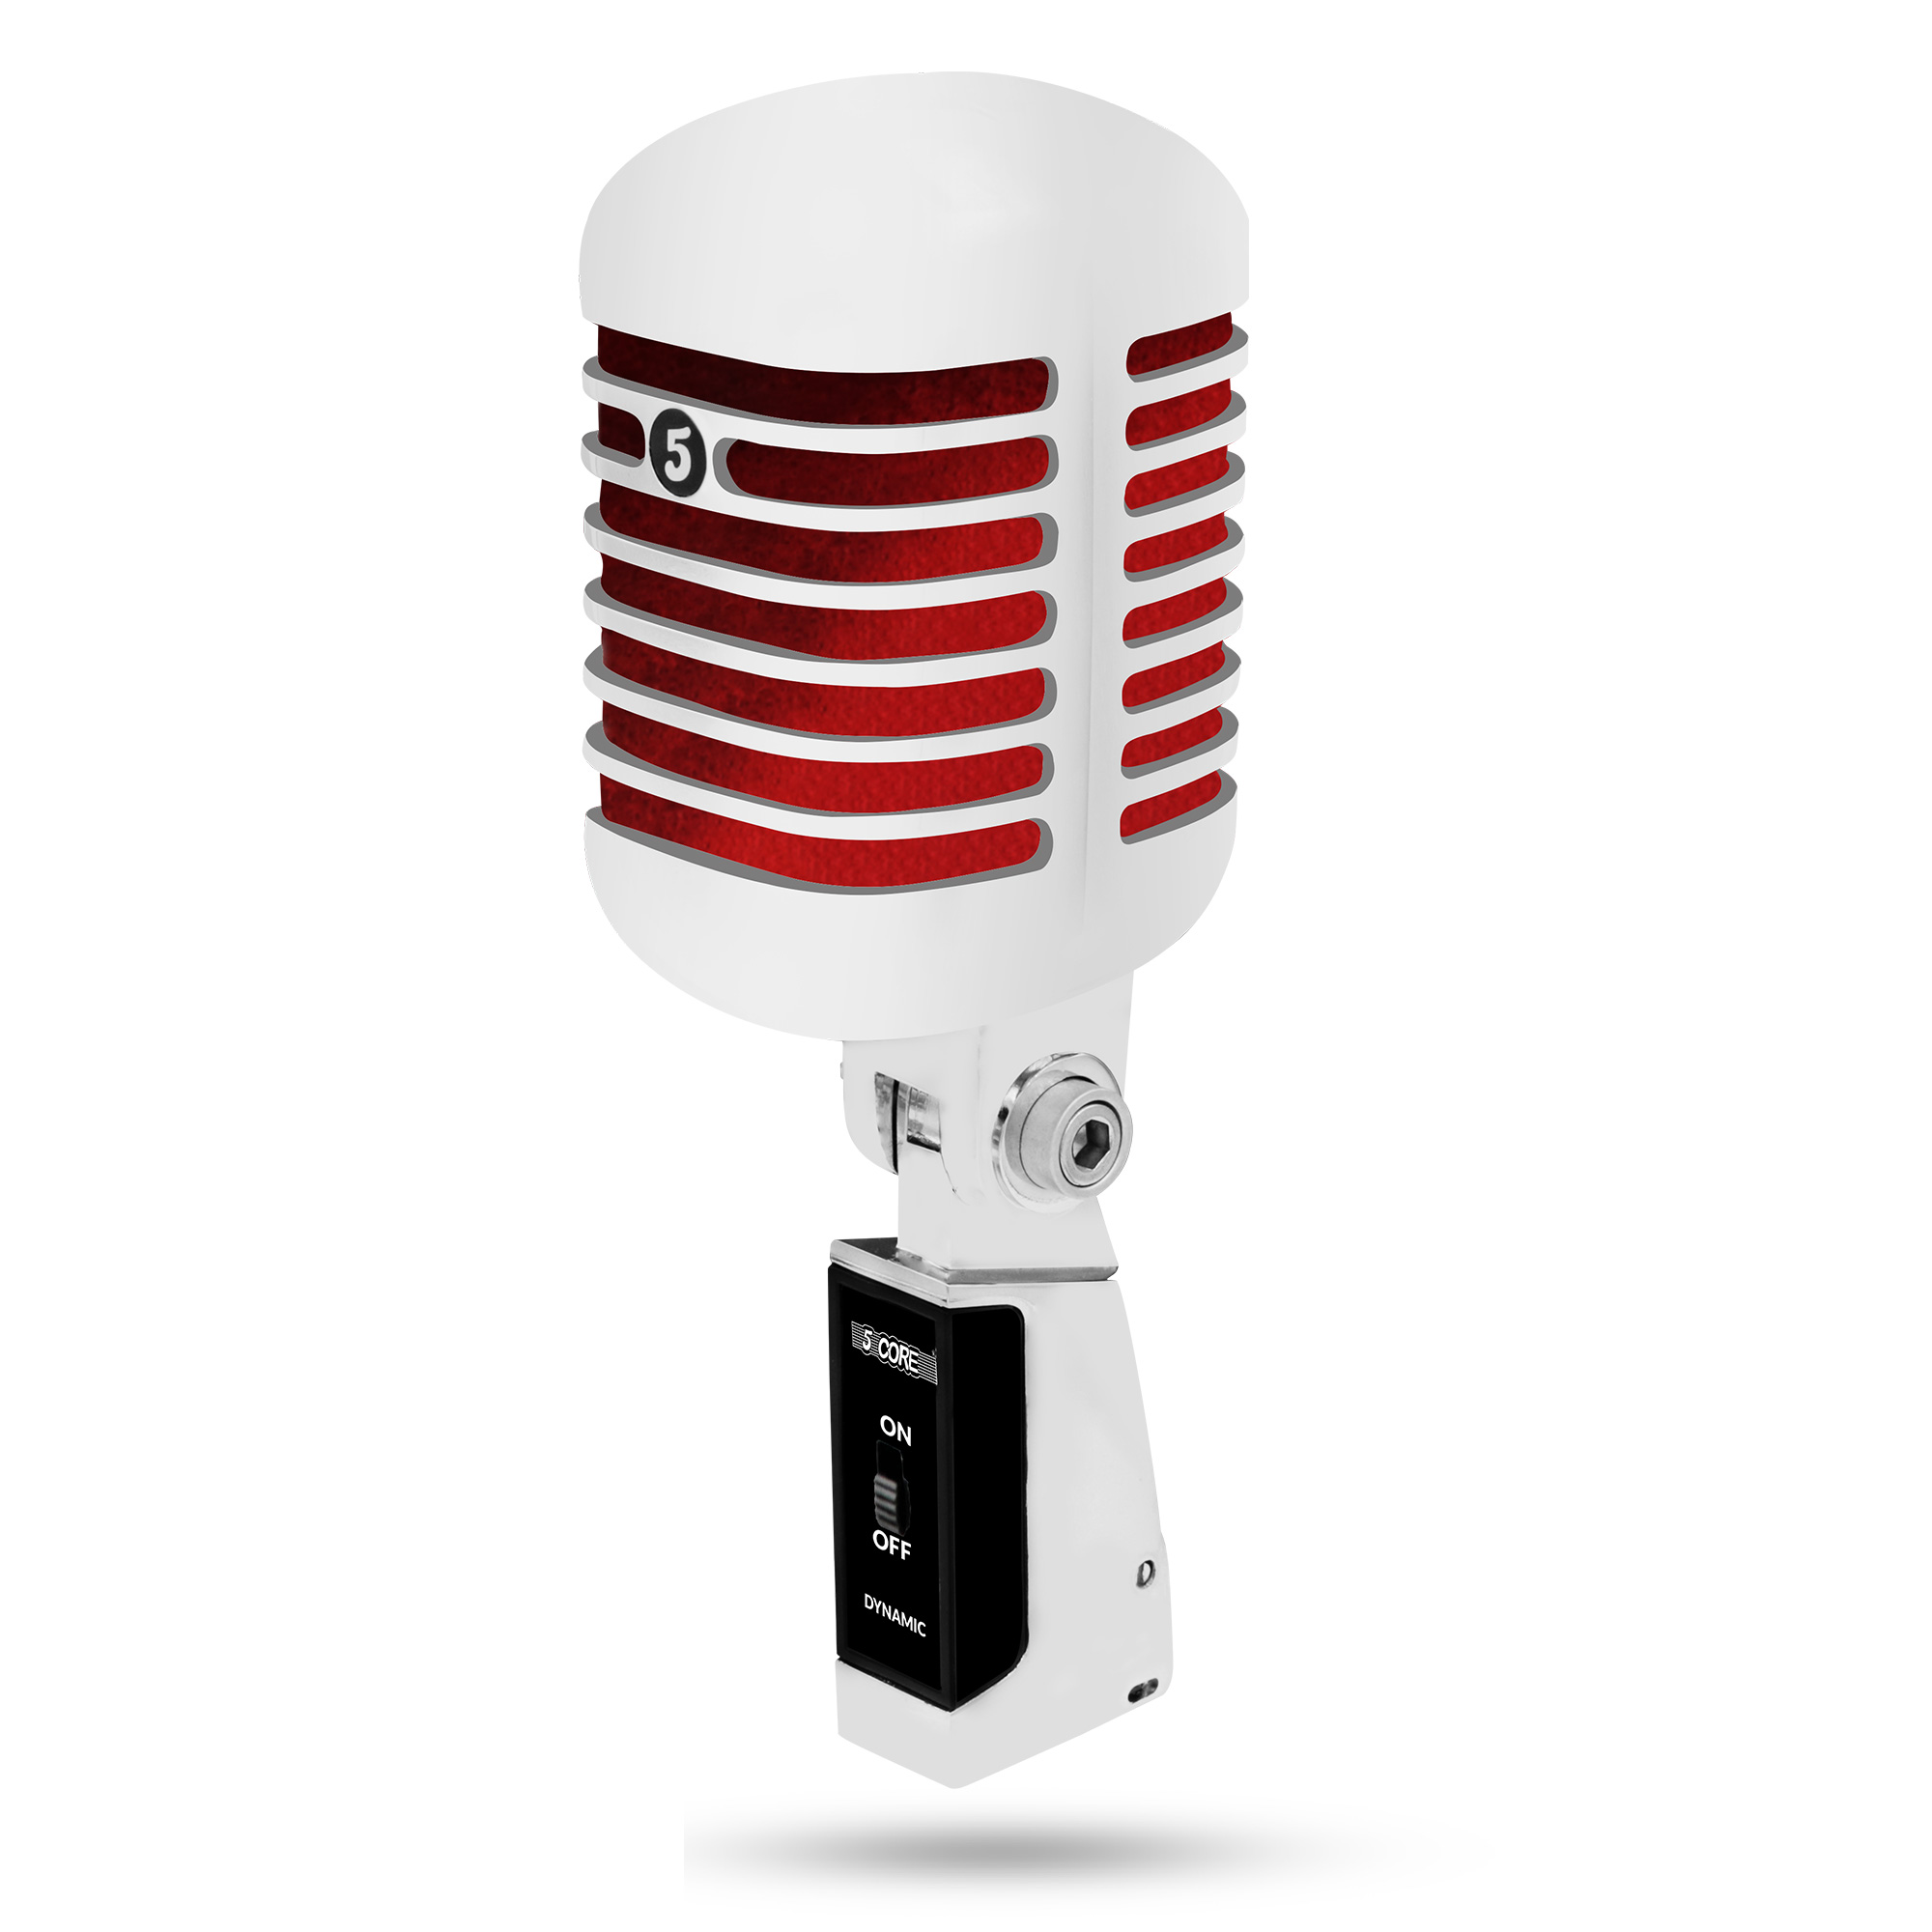 The model is RTRO MIC CH RED